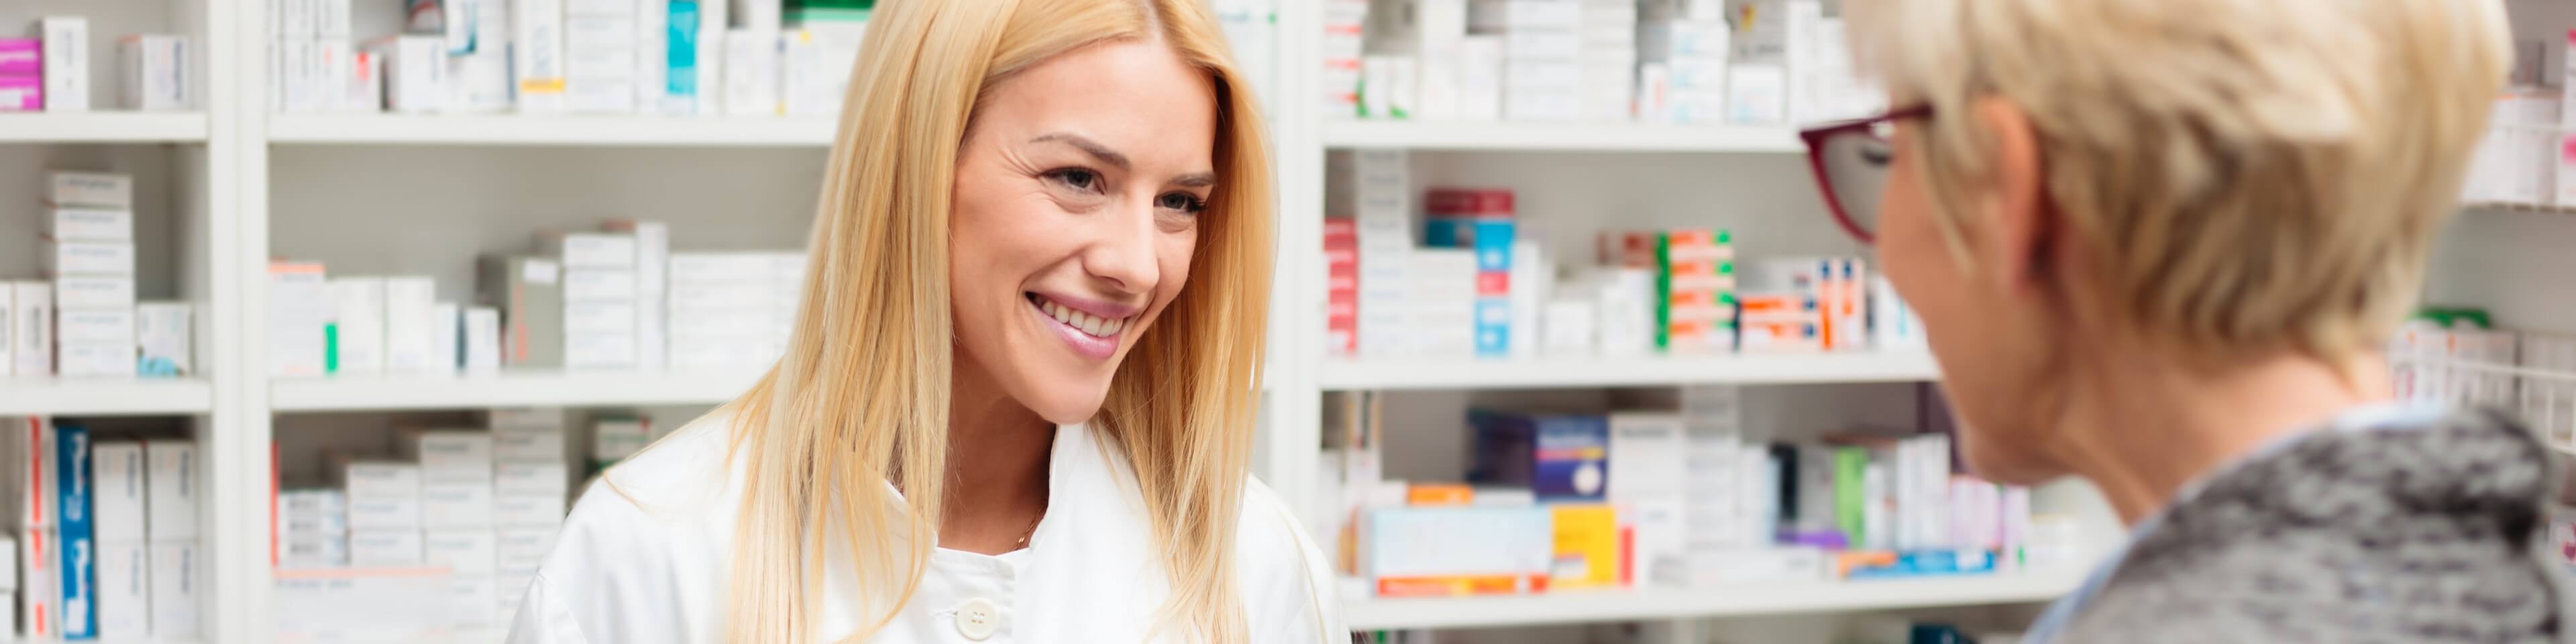 Pharmacist speaking with a customer